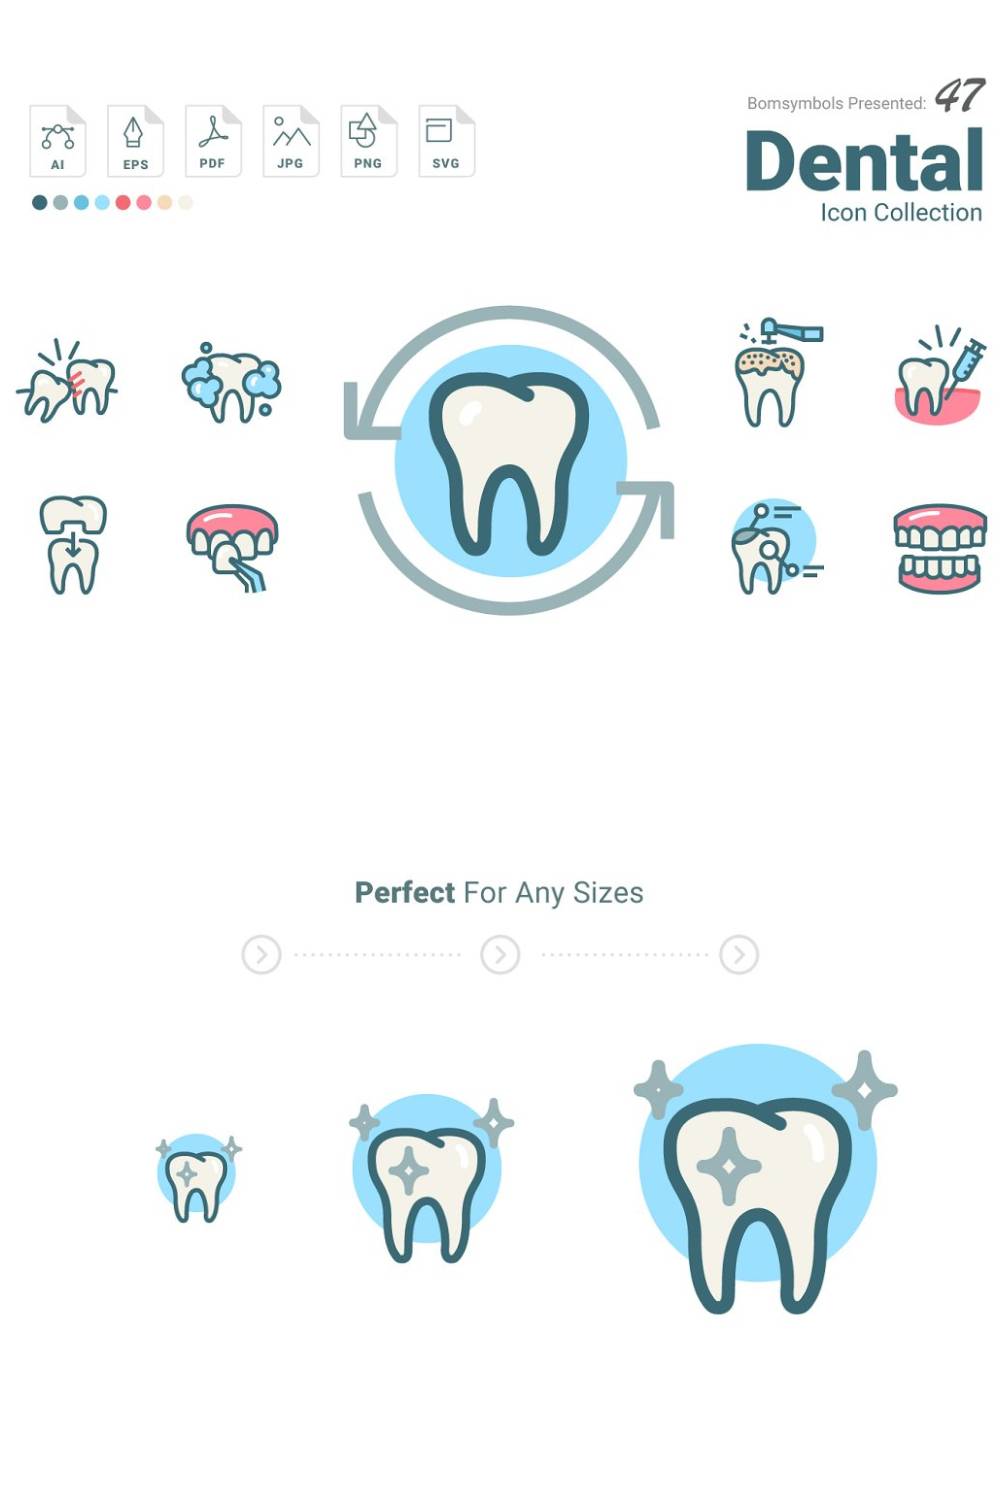 47 Dental Icon Collection Pinterest Cover.